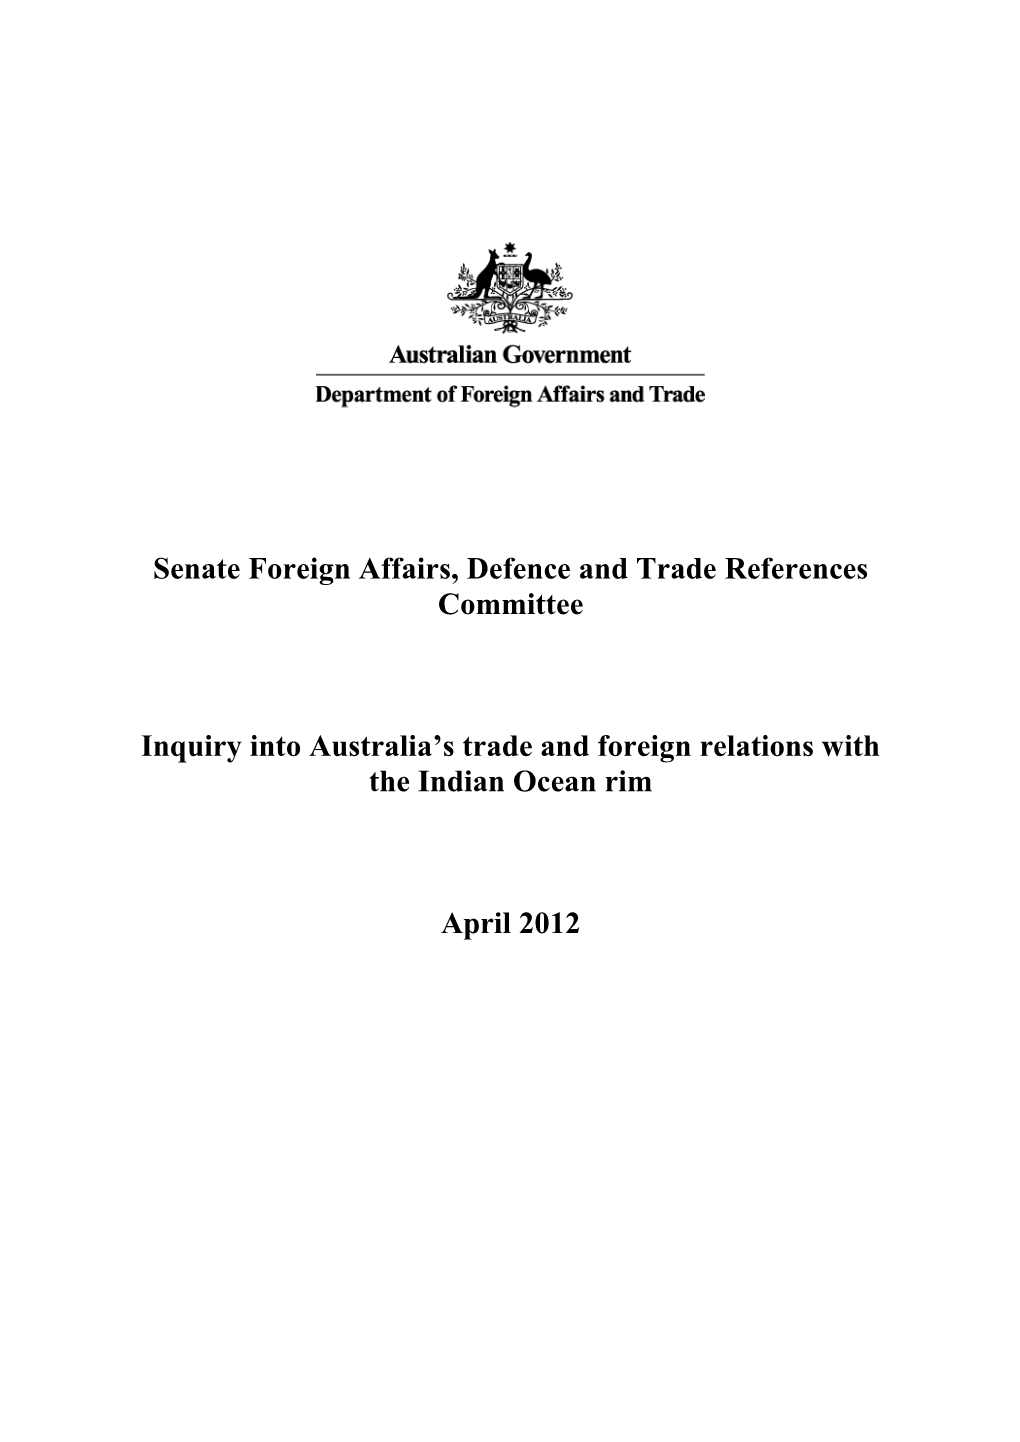 Senate Foreign Affairs, Defence and Trade References Committee